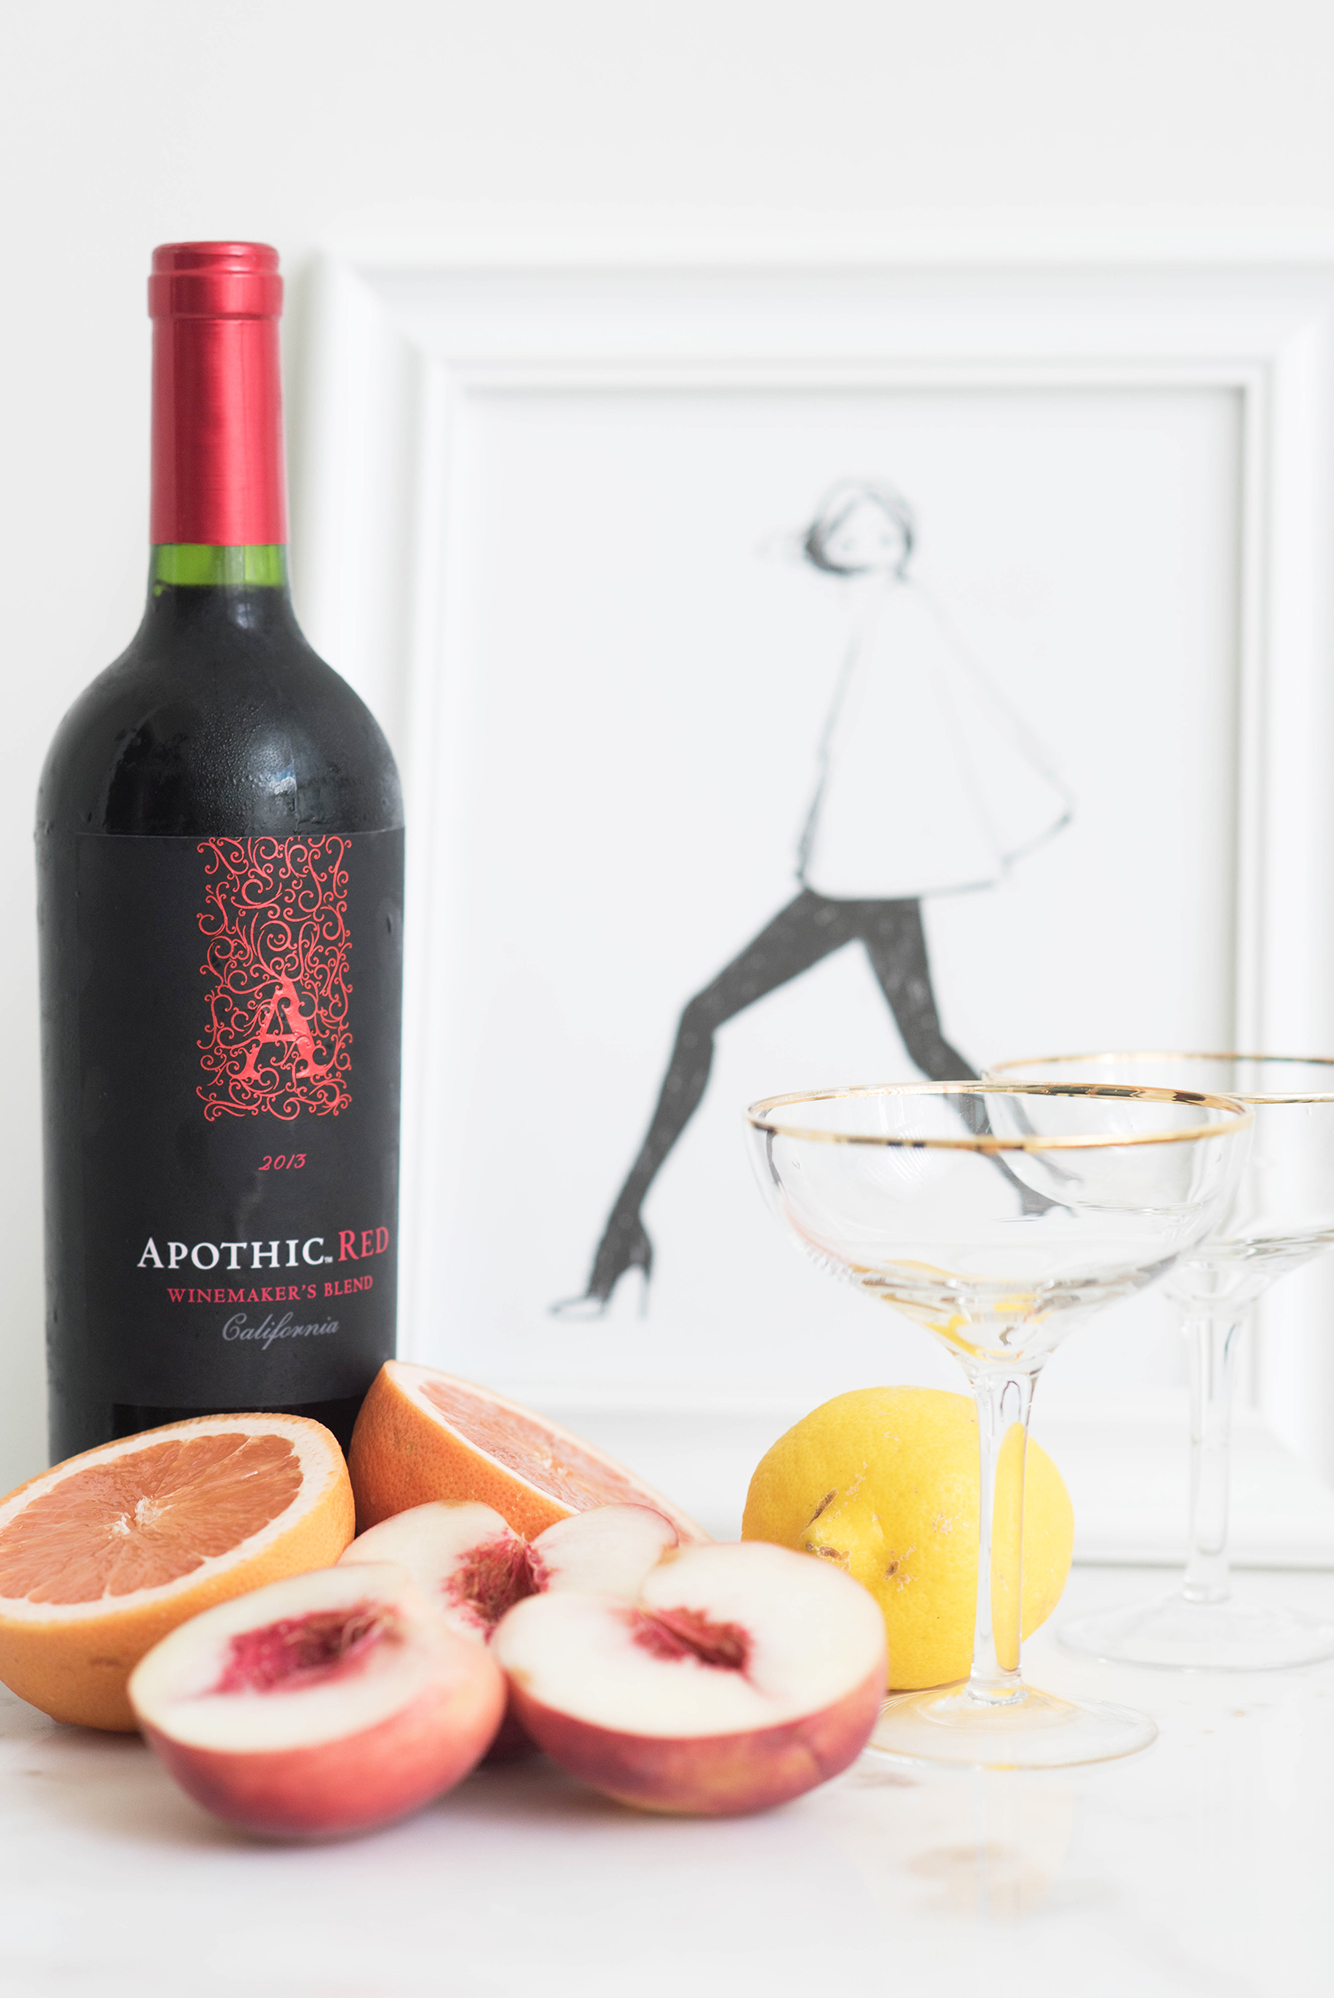 coco-and-vrea-top-vancouver-style-blog-top-canadian-style-blog-top-blogger-summer-sangria-apothic-wine-citrus-peach-sangria-recipe-apothic-red